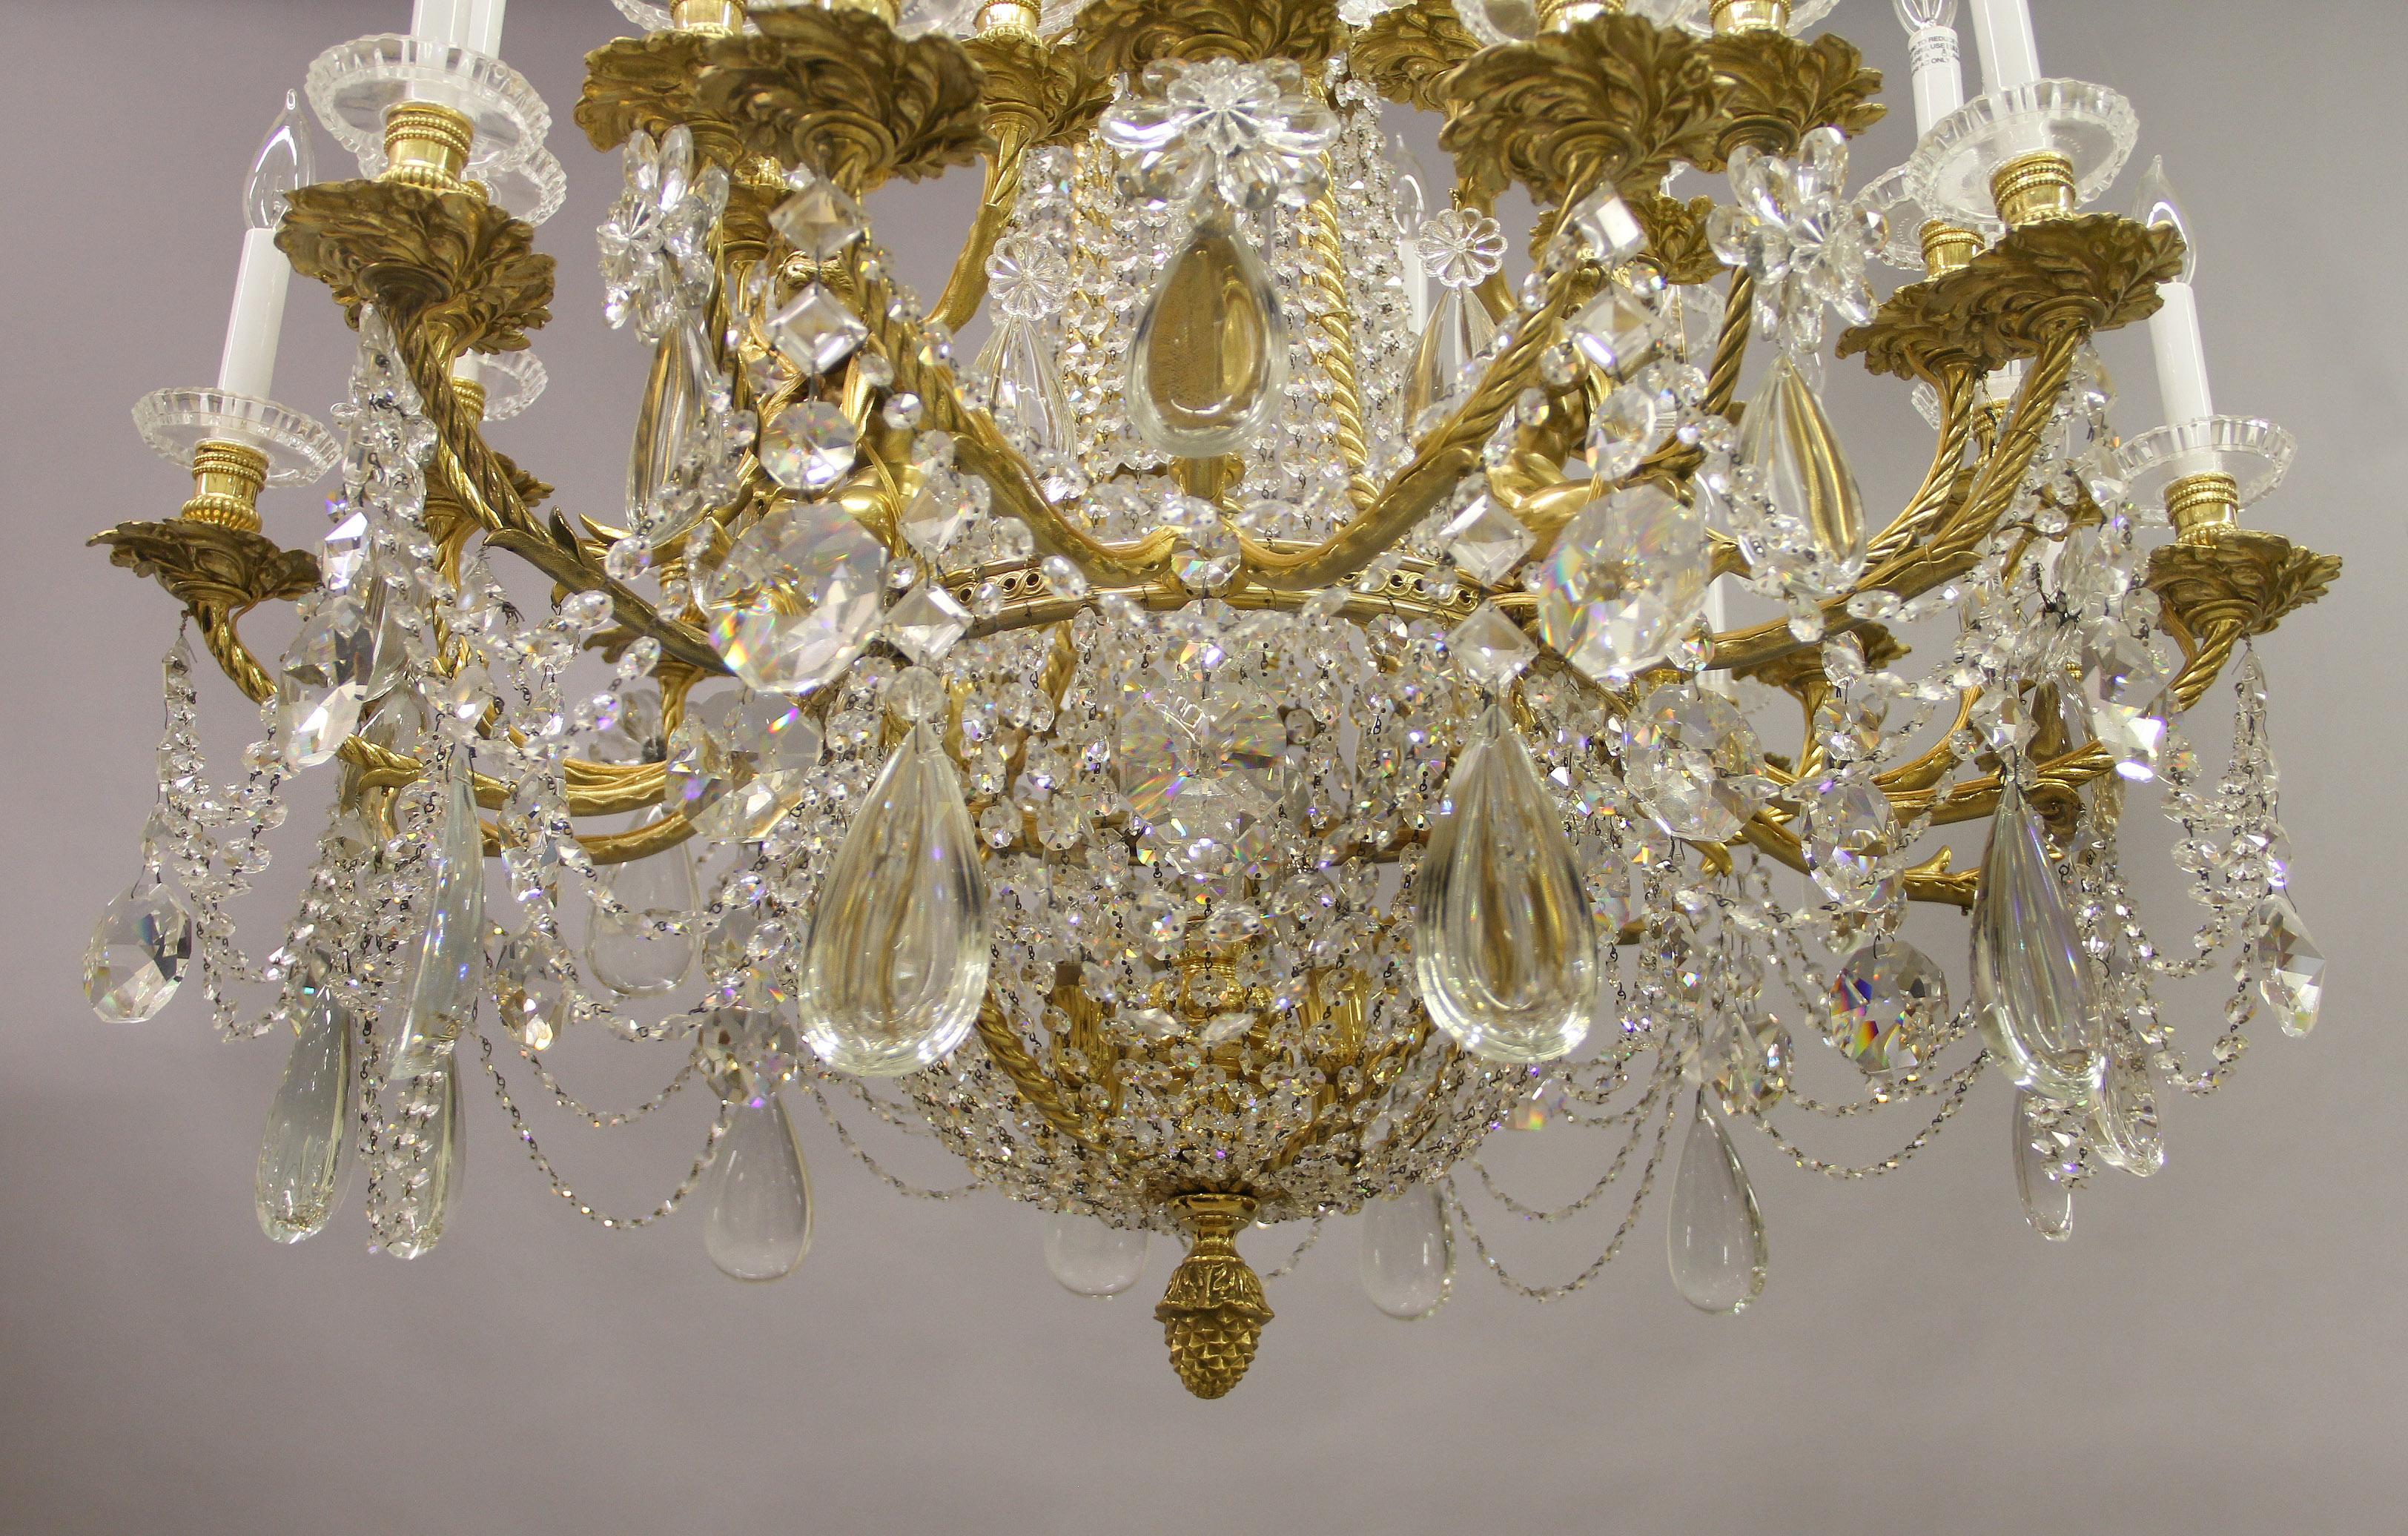 Exquisite Late 19th Century Gilt Bronze and Crystal Chandelier by Baccarat For Sale 3